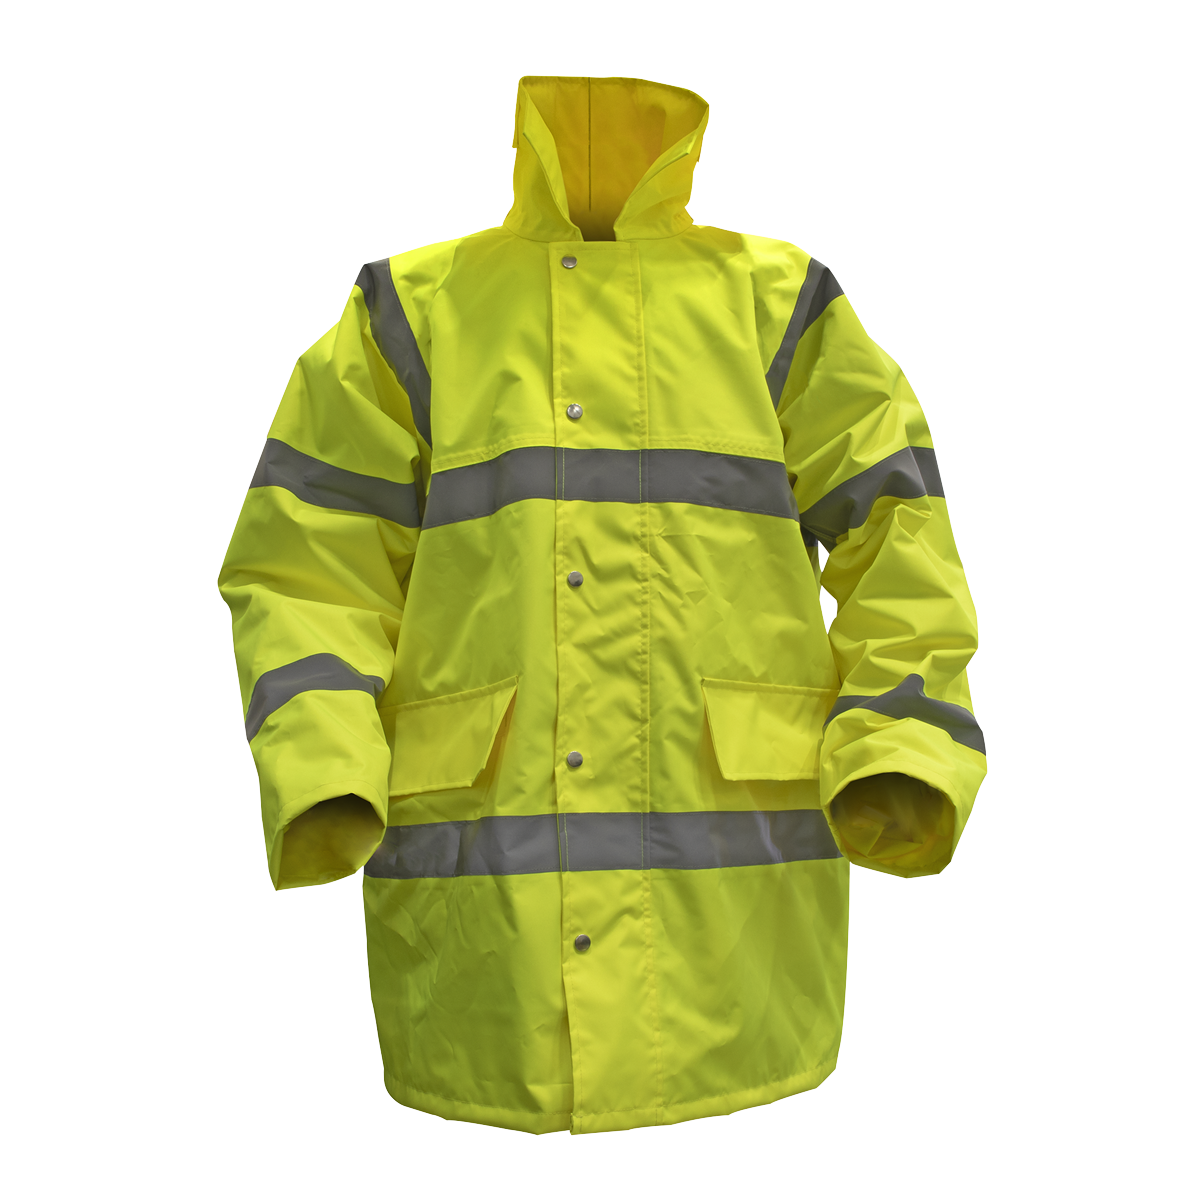 Sealey Hi-Vis Yellow Motorway Jacket with Quilted Lining - Large 806L